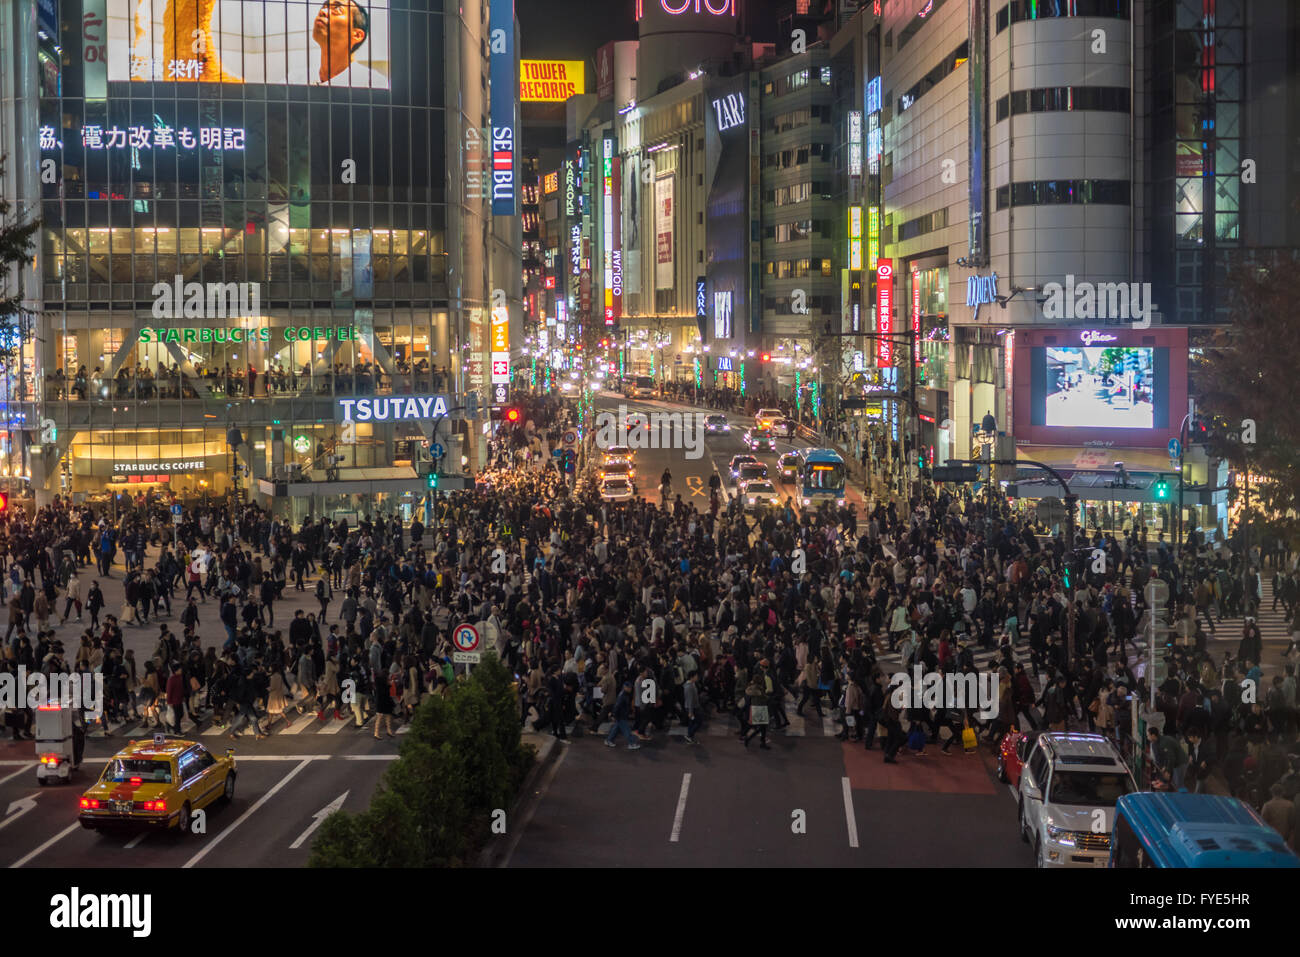 TOKYO, JAPAN - November, 22, 2014: Shibuya crossing in Tokyo, the busiest intersection in the world Stock Photo